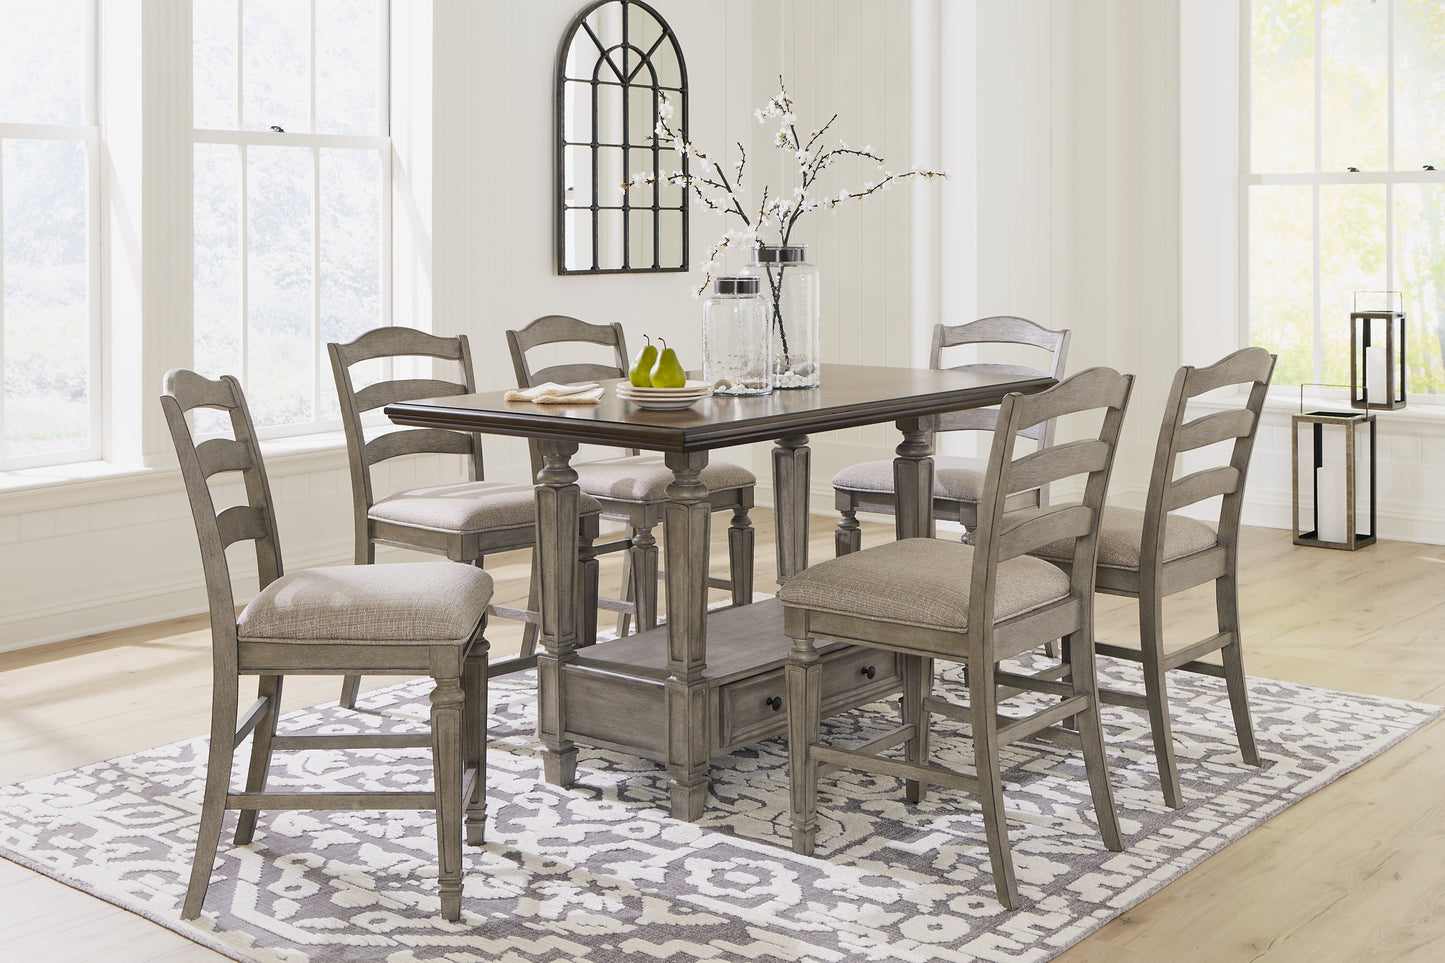 Lodenbay Counter Height Dining Table and 6 Barstools with Storage